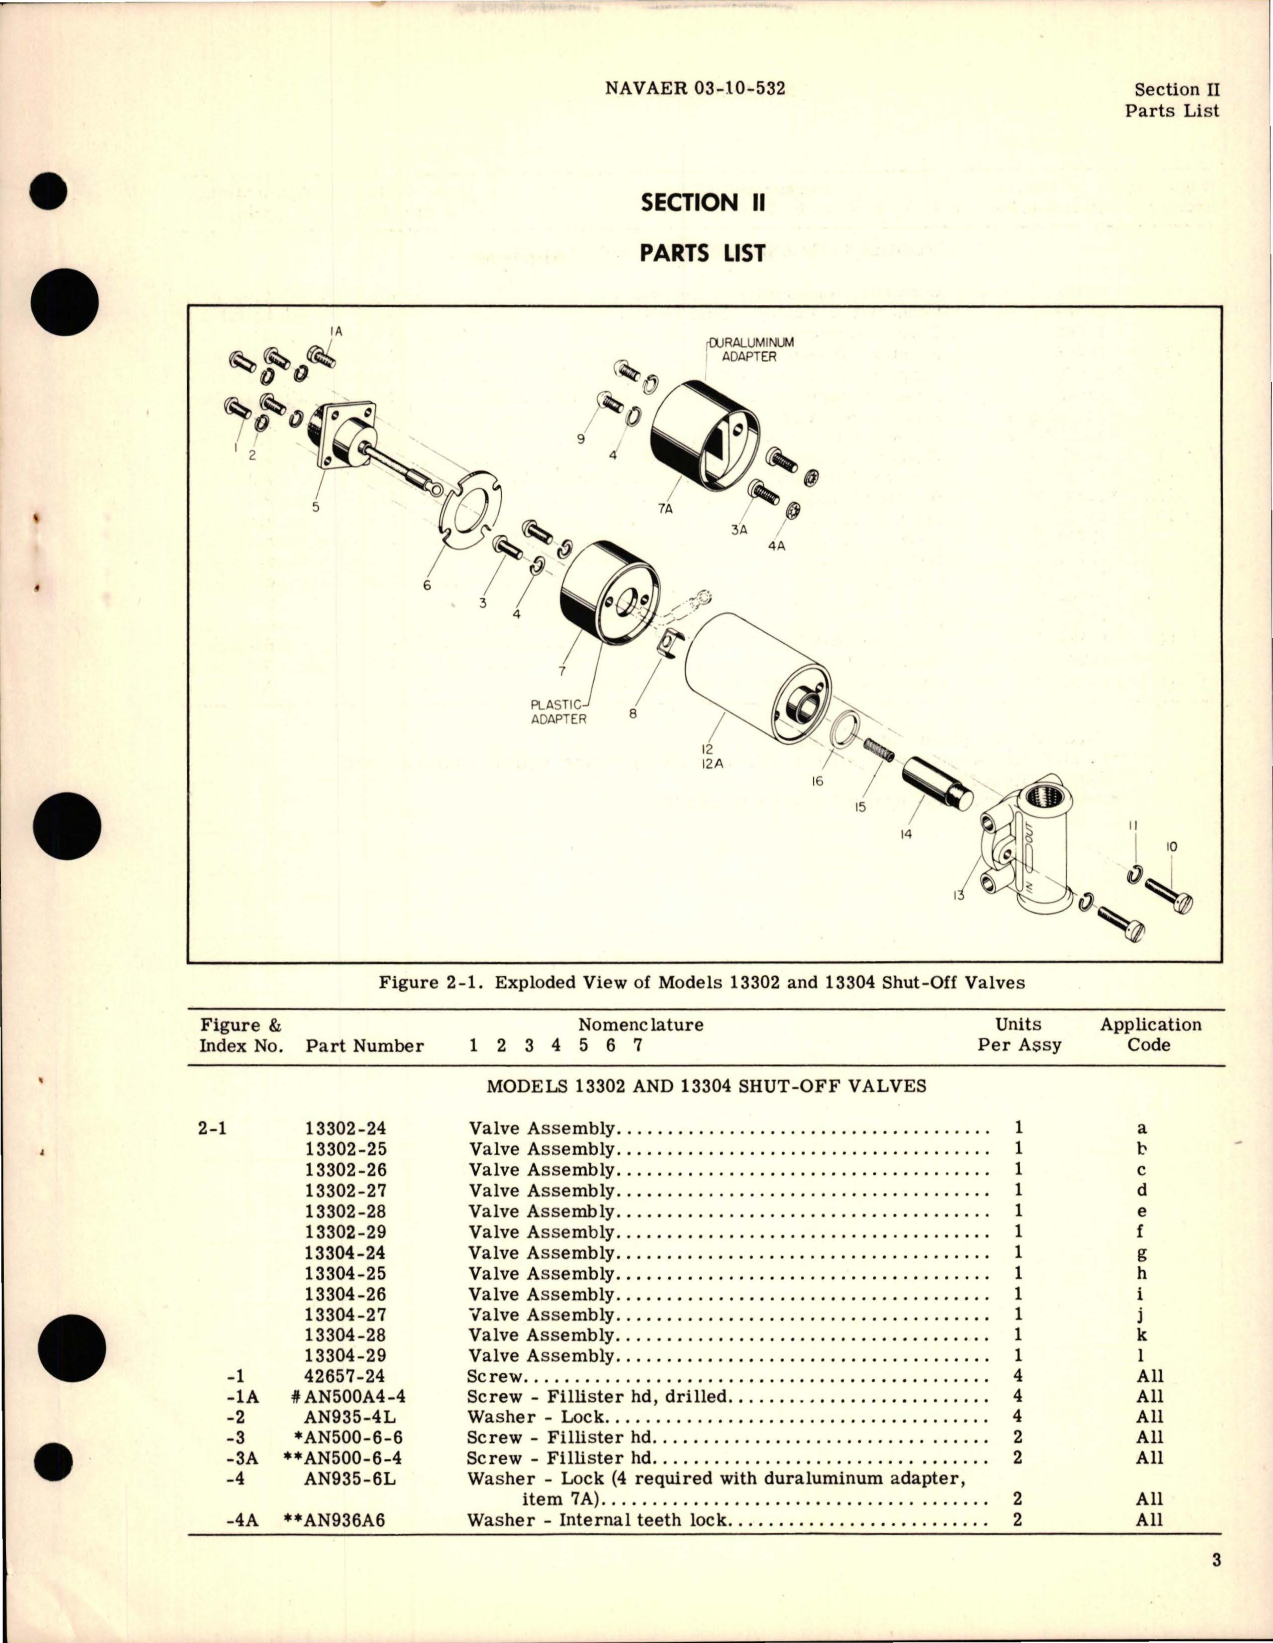 Sample page 5 from AirCorps Library document: Overhaul Instructions with Parts Catalog for Solenoid Operated Hydraulic and Pneumatic Shut-Off Valves - 13302 and 13304 Series 